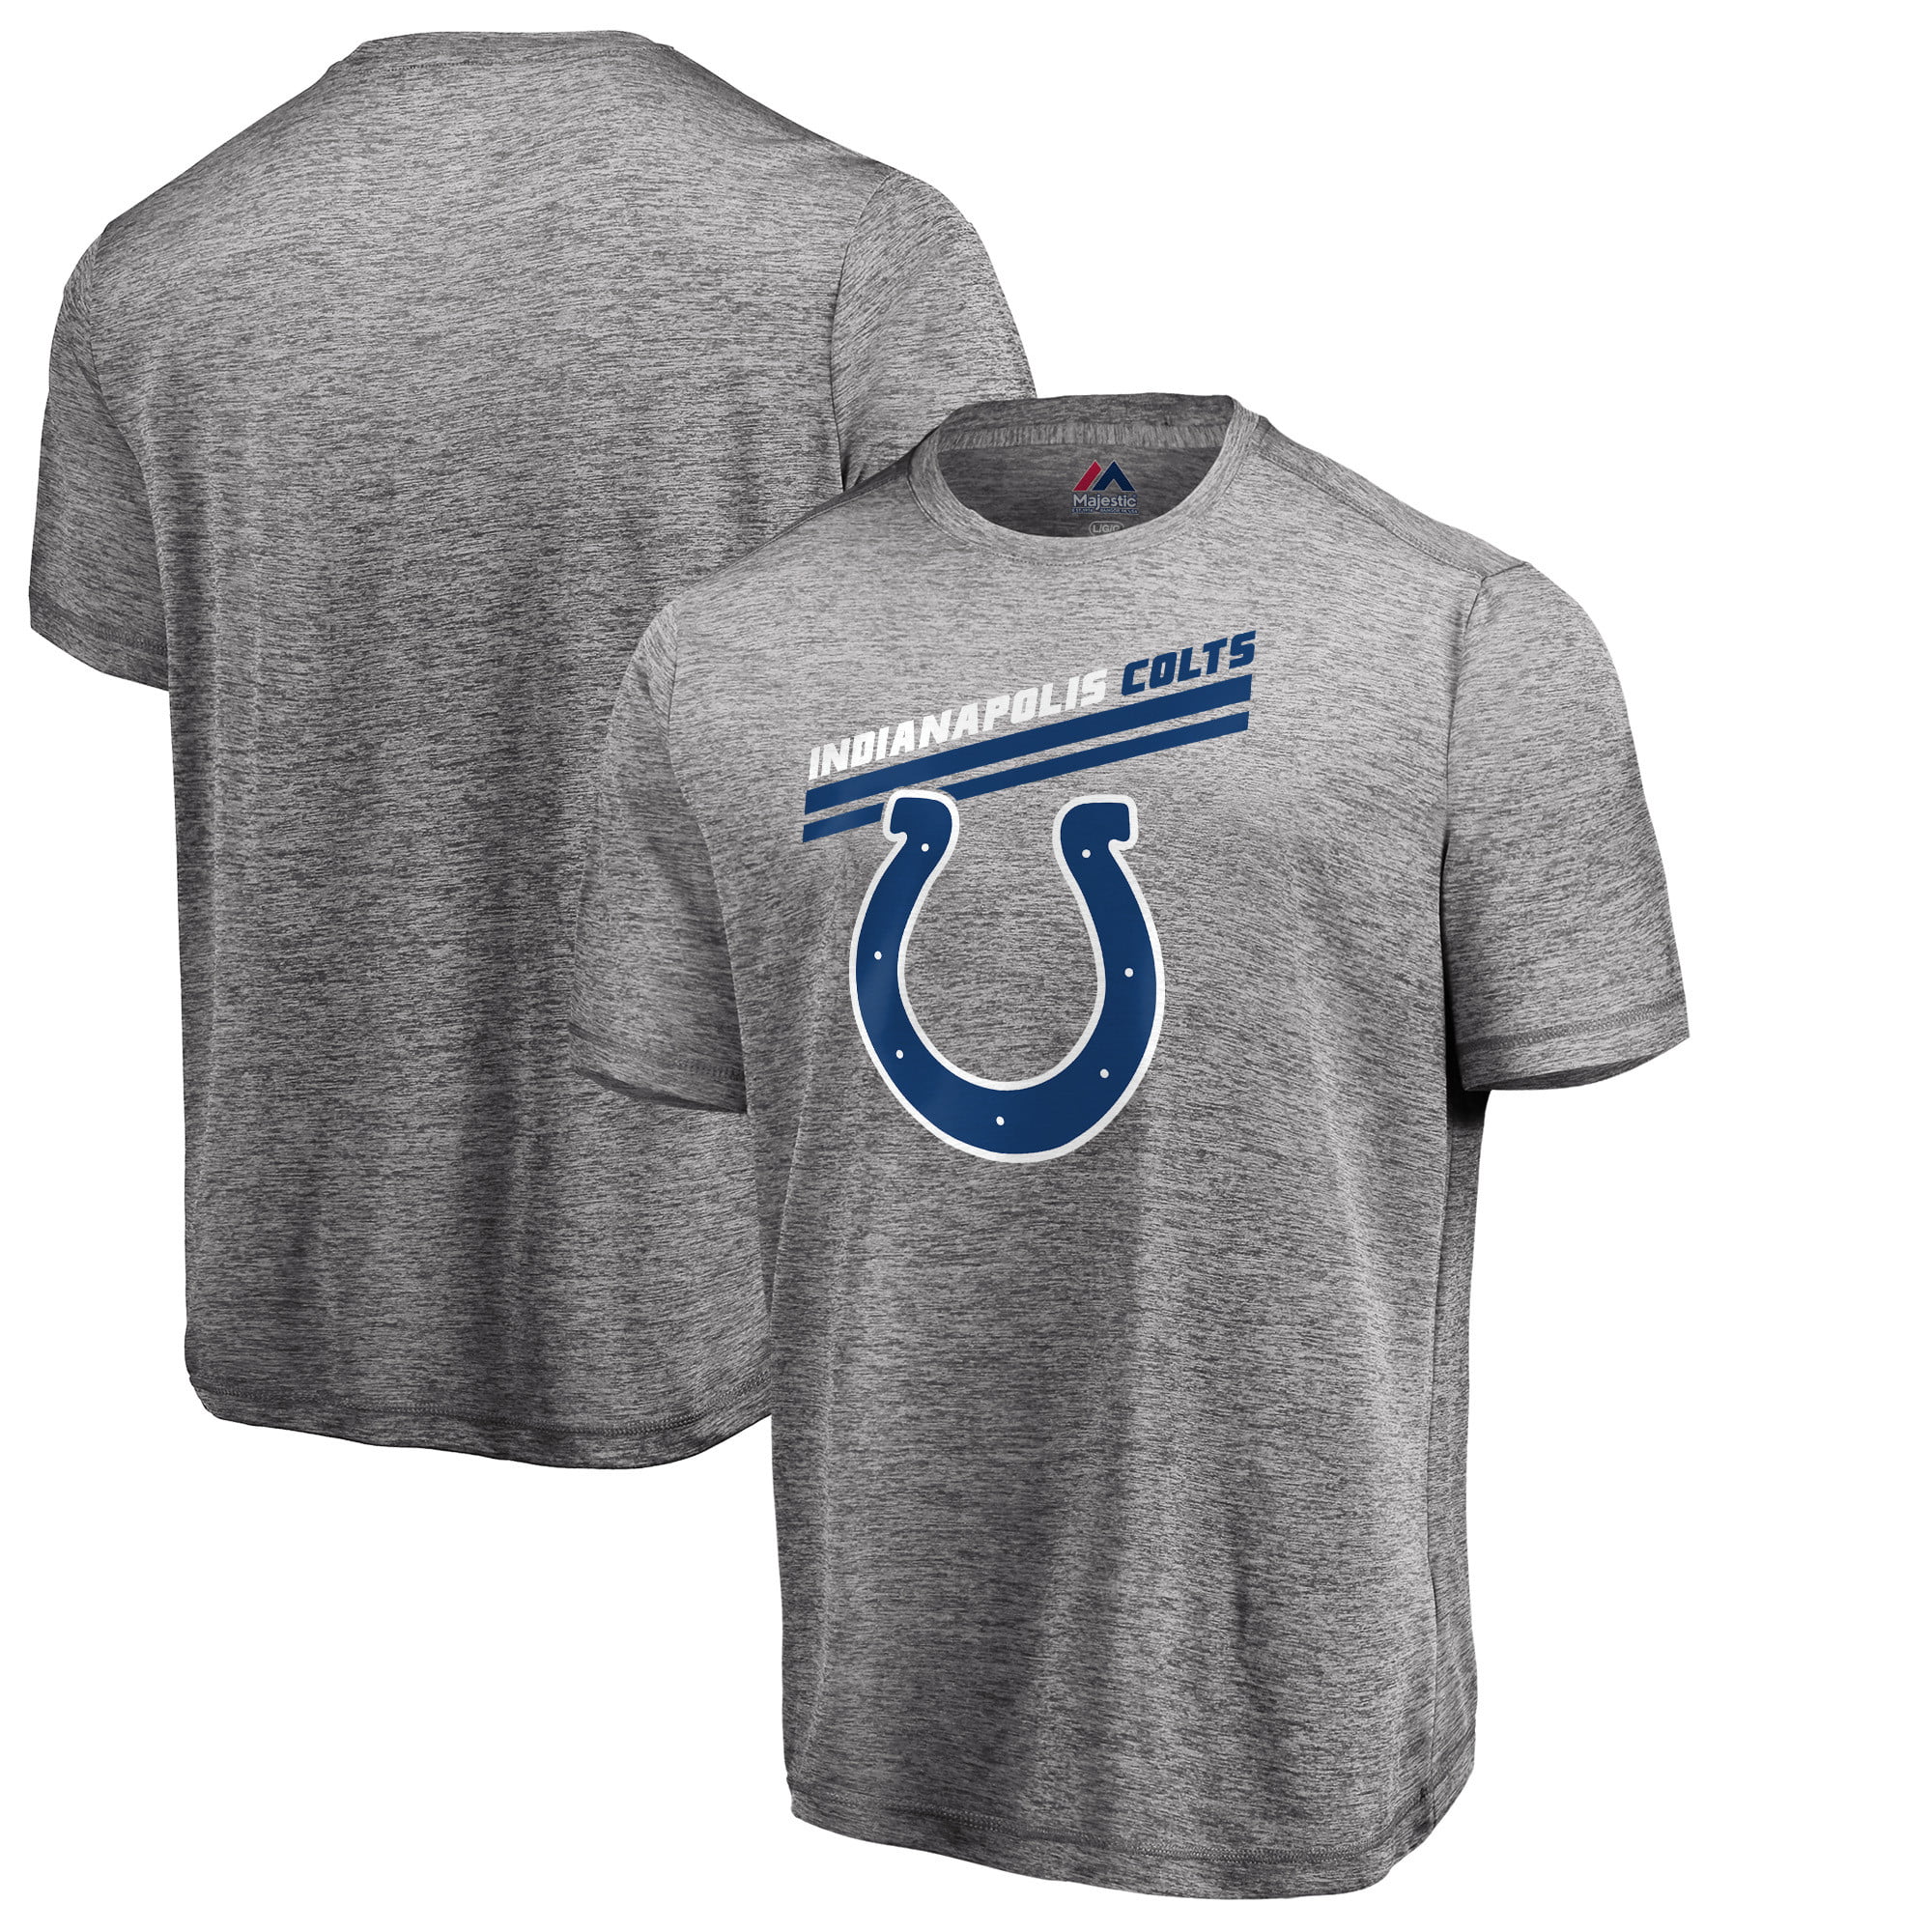 Indianapolis Colts Themed Casual Athletic Running Shoe Mens Womens Sizes Colt Football Apparel Gear and Gifts for Men Women Fan Merchandise